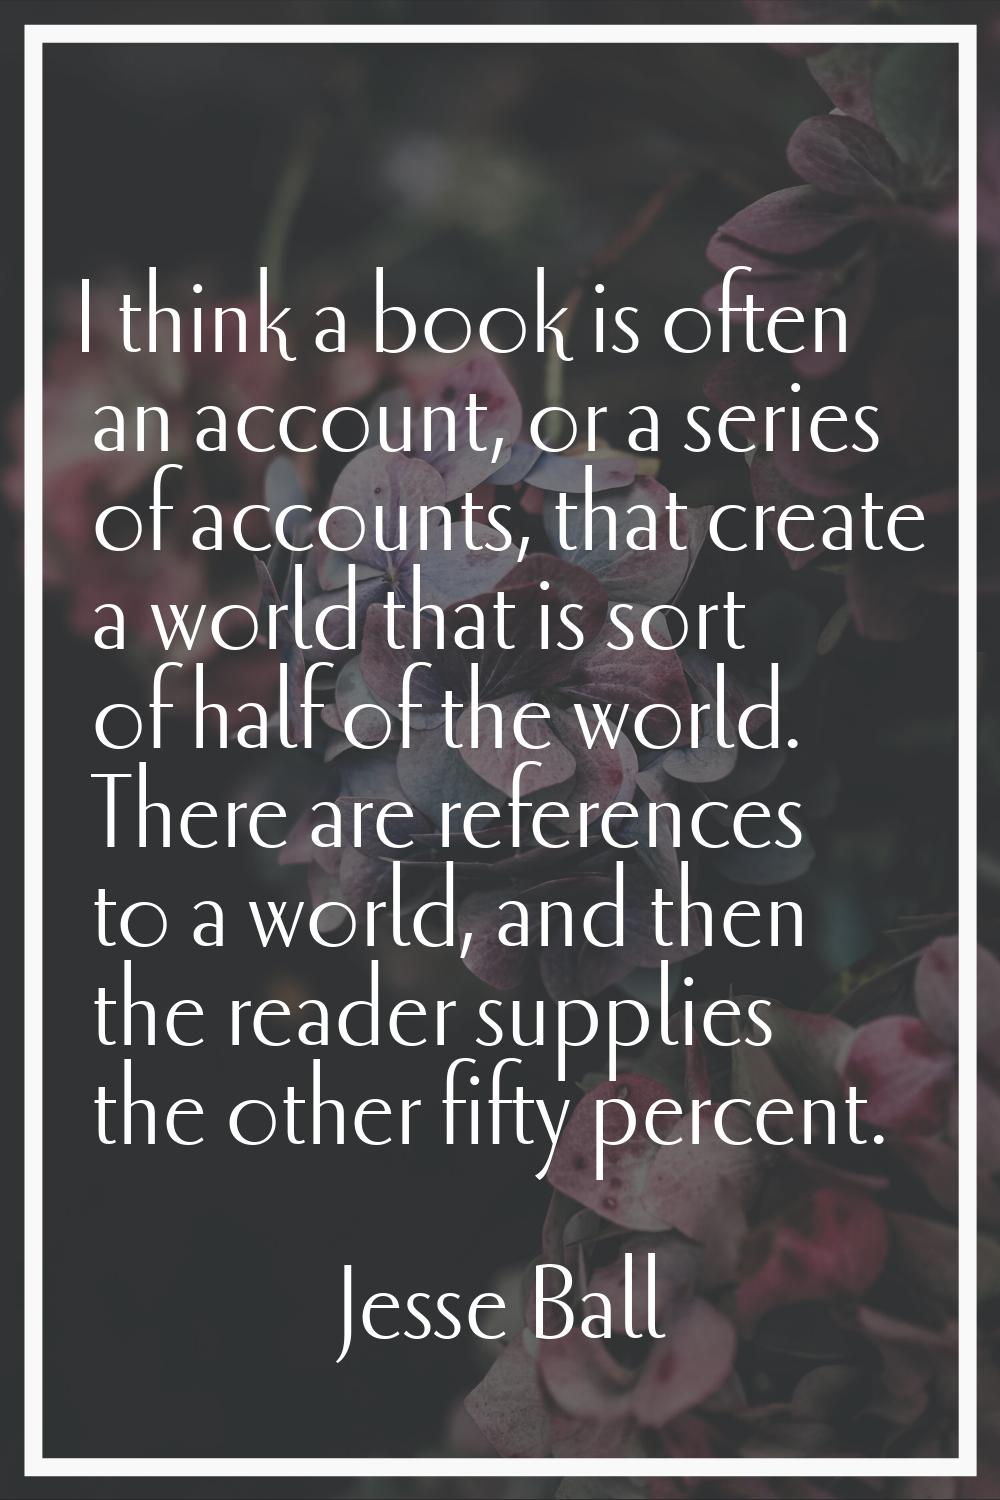 I think a book is often an account, or a series of accounts, that create a world that is sort of ha